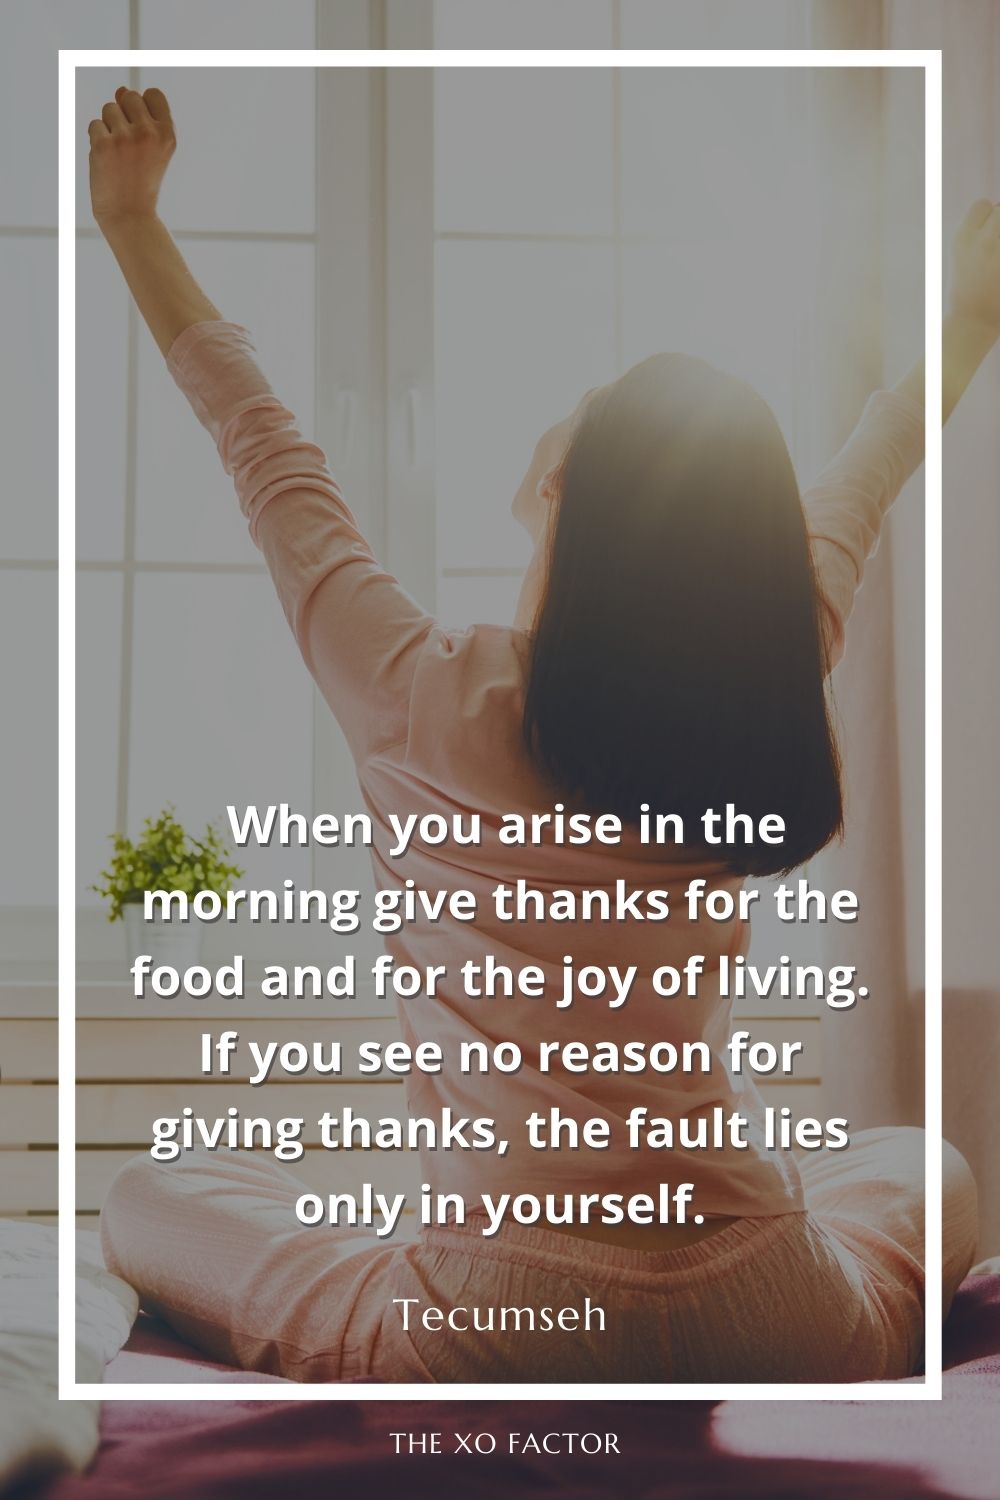  When you arise in the morning give thanks for the food and for the joy of living. If you see no reason for giving thanks, the fault lies only in yourself.